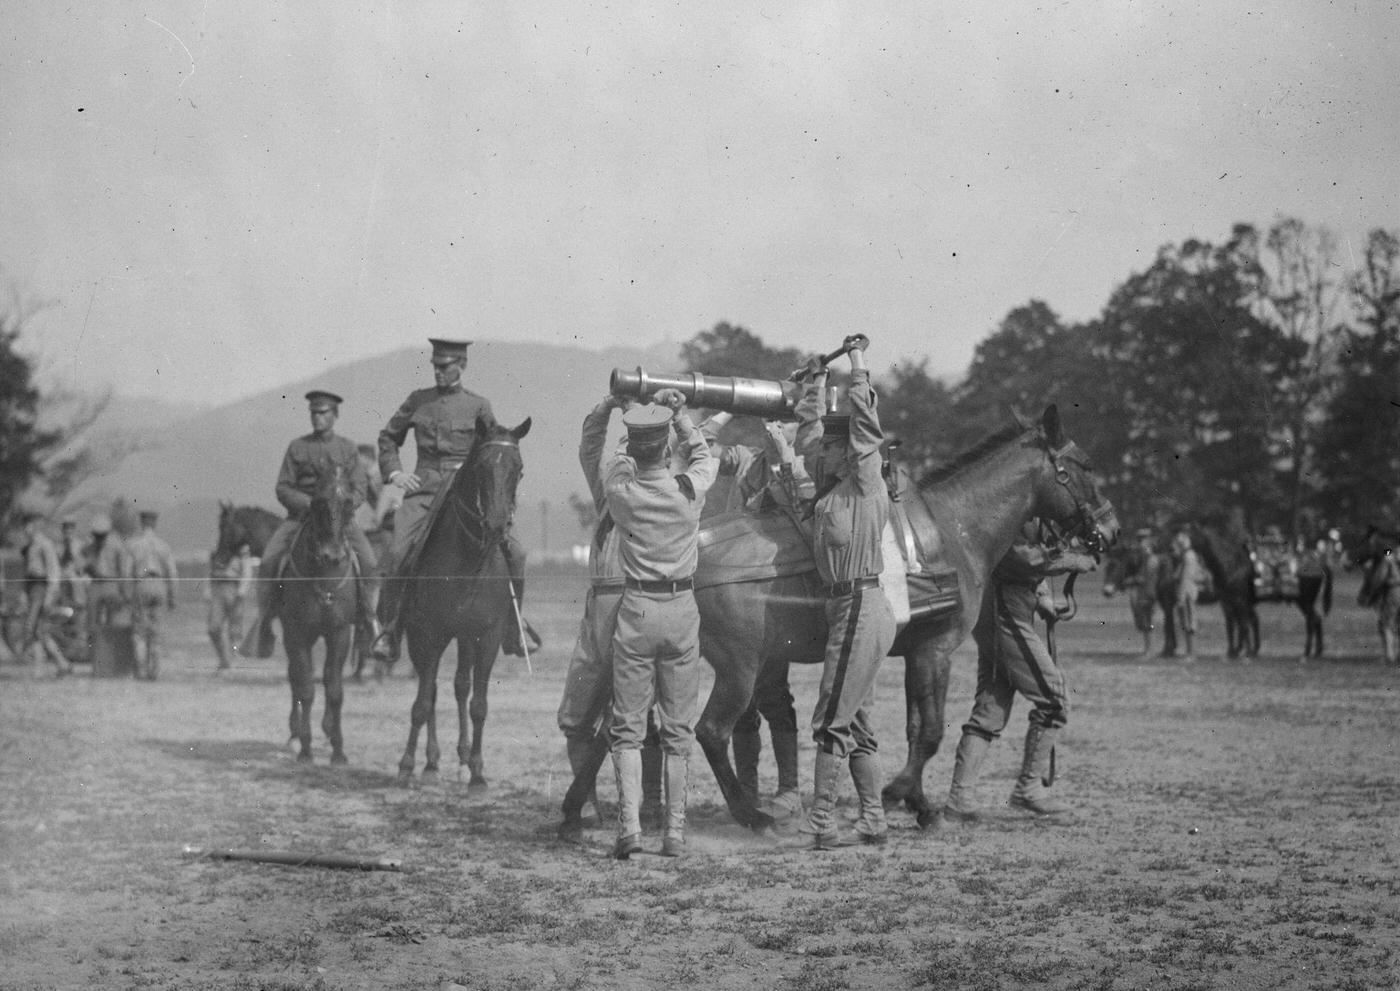 Army Cadets Lift Large Artillery Piece from a Horse as part of their training under the watchful eye of mounted Instructors, 1900